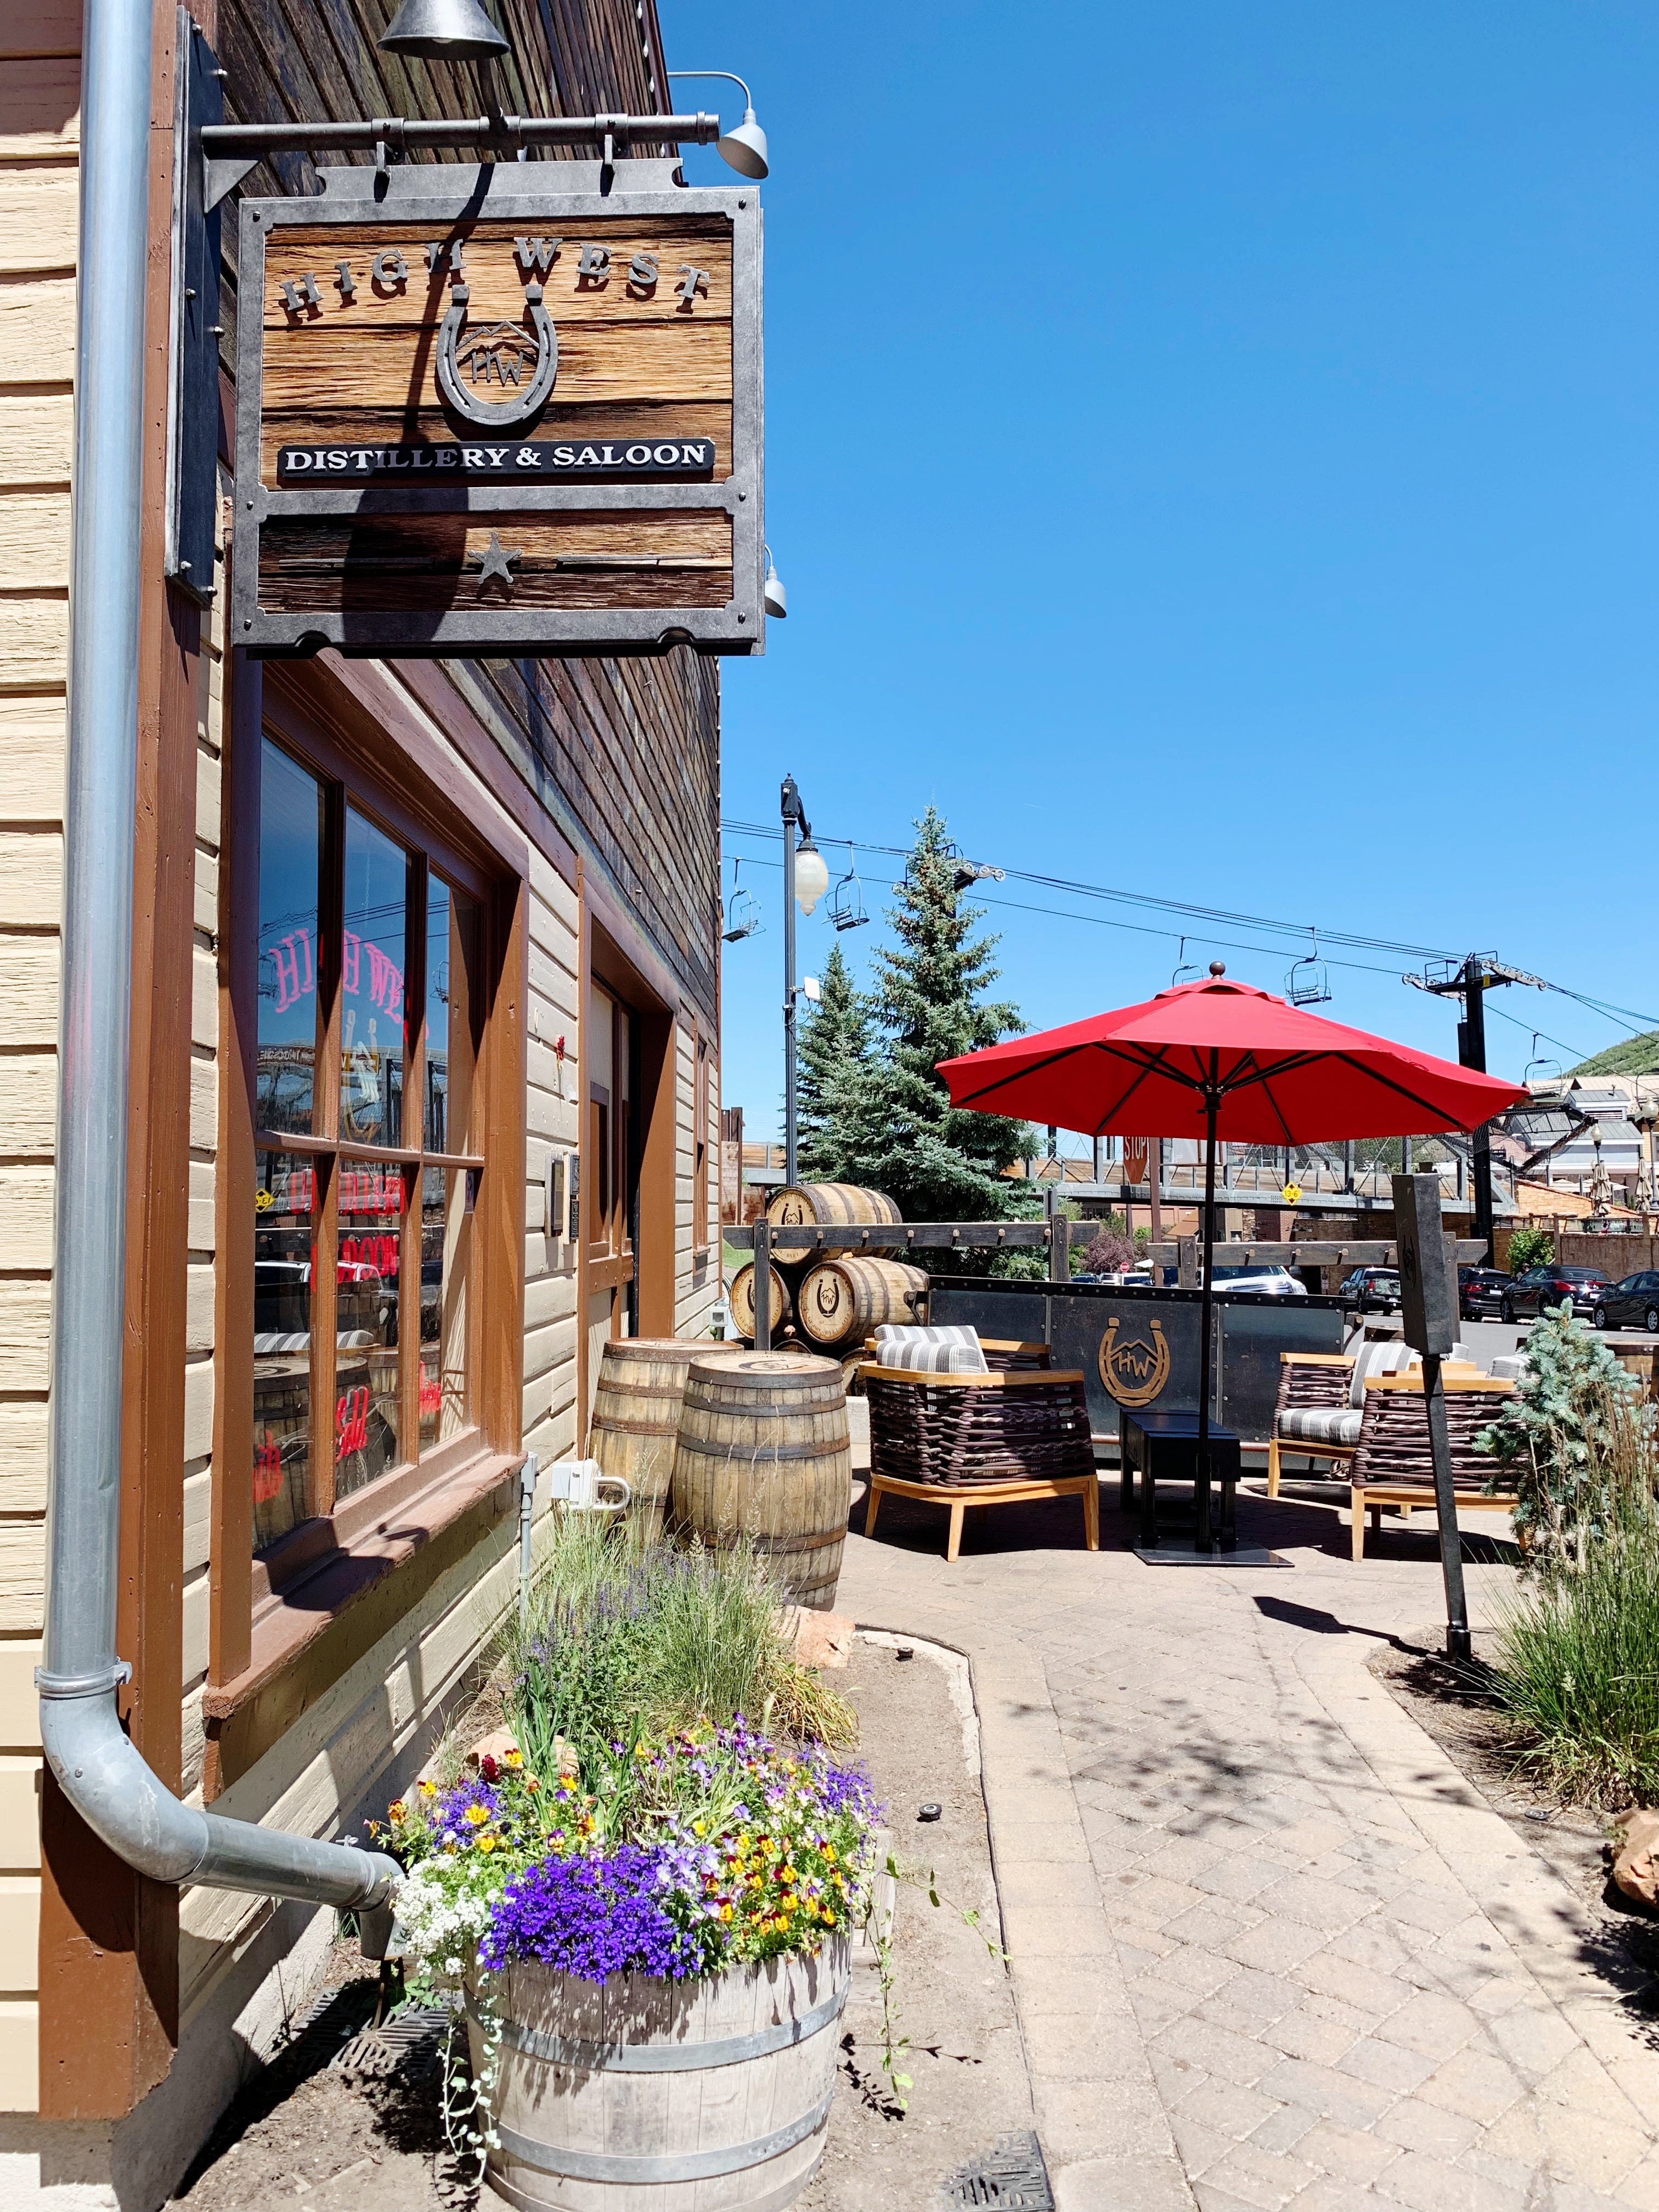 A Weekend Guide To Park City, Utah - What to do in Park City Utah - Park City Utah Restaurants - Park City Utah Hotels - Park City Utah Travel Guide